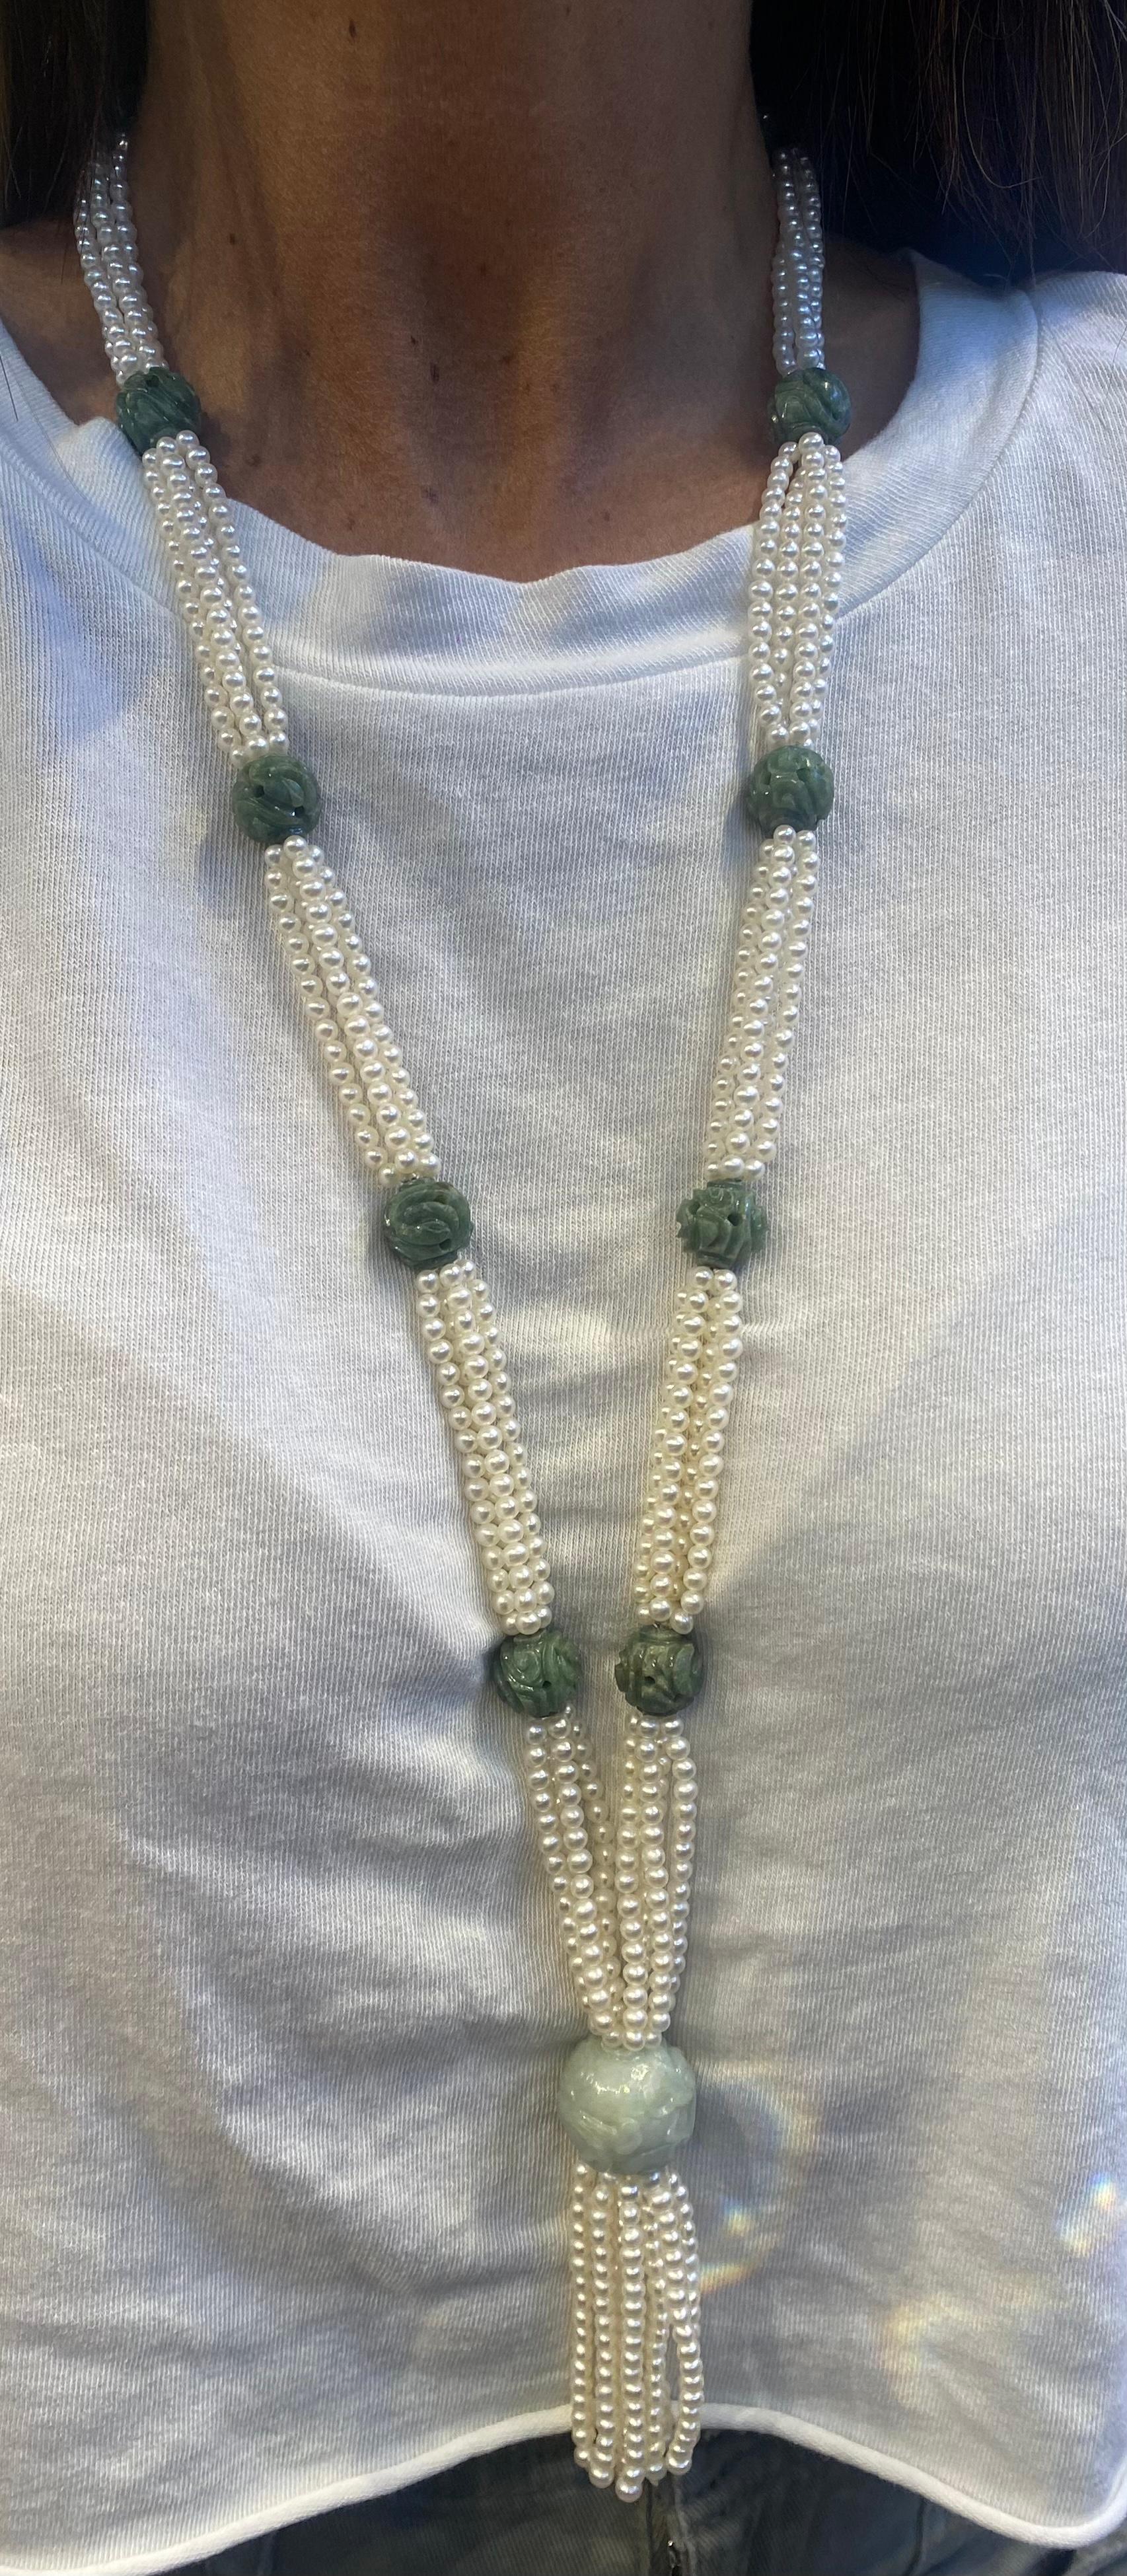 Carved Jade and Pearl Tassel Necklace 

A necklace made of 4 strands of pearls with 12 carved jades

Measurements: 30